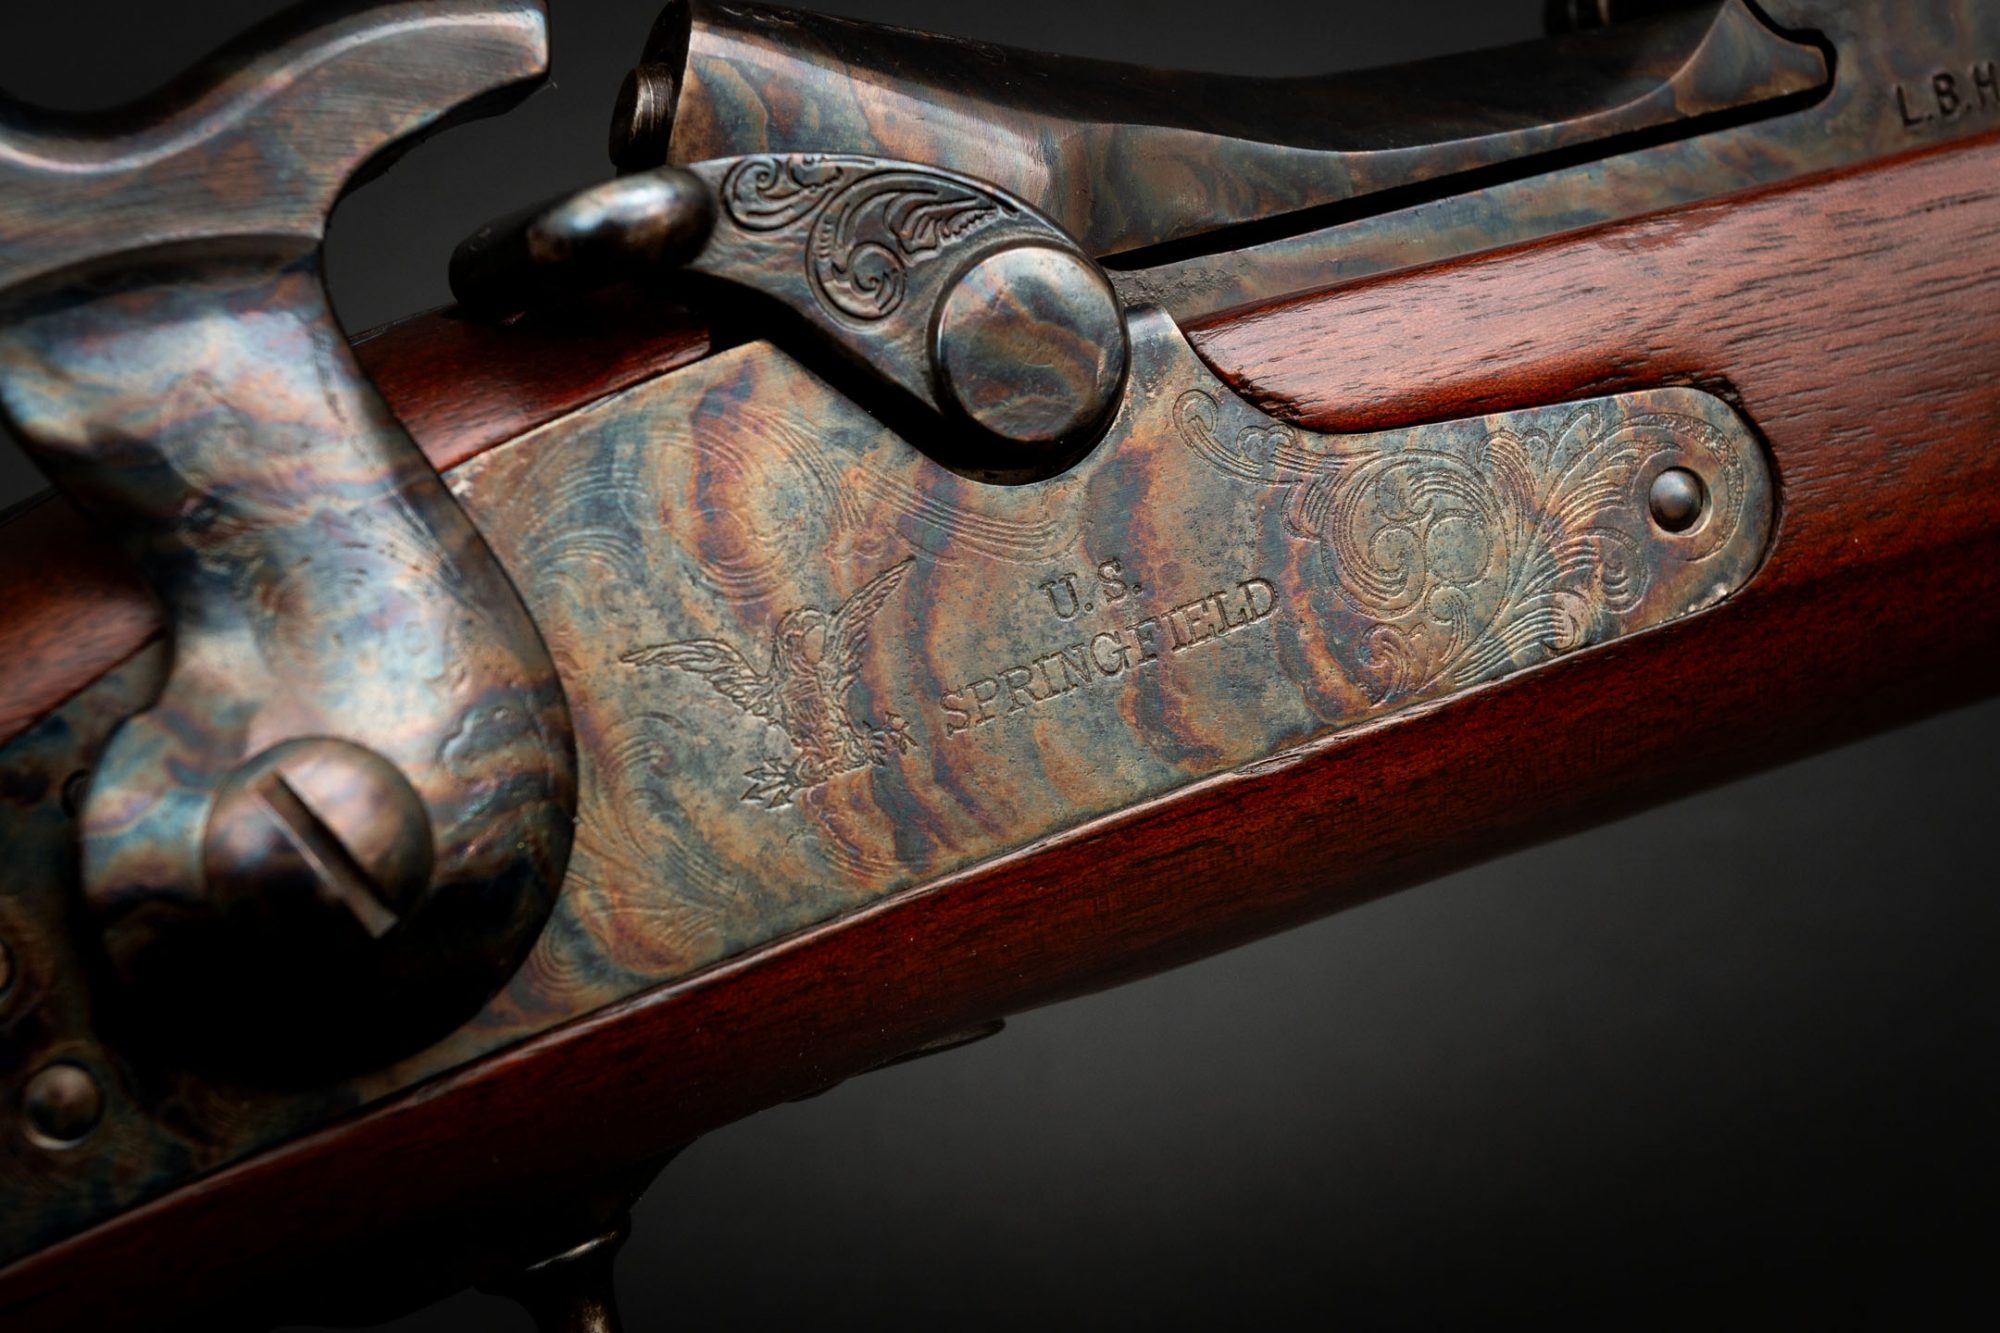 H&R U.S. Model 1873 Trapdoor Carbine in 45-70 Govt., for sale by Turnbull Restoration Co. of Bloomfield, NY